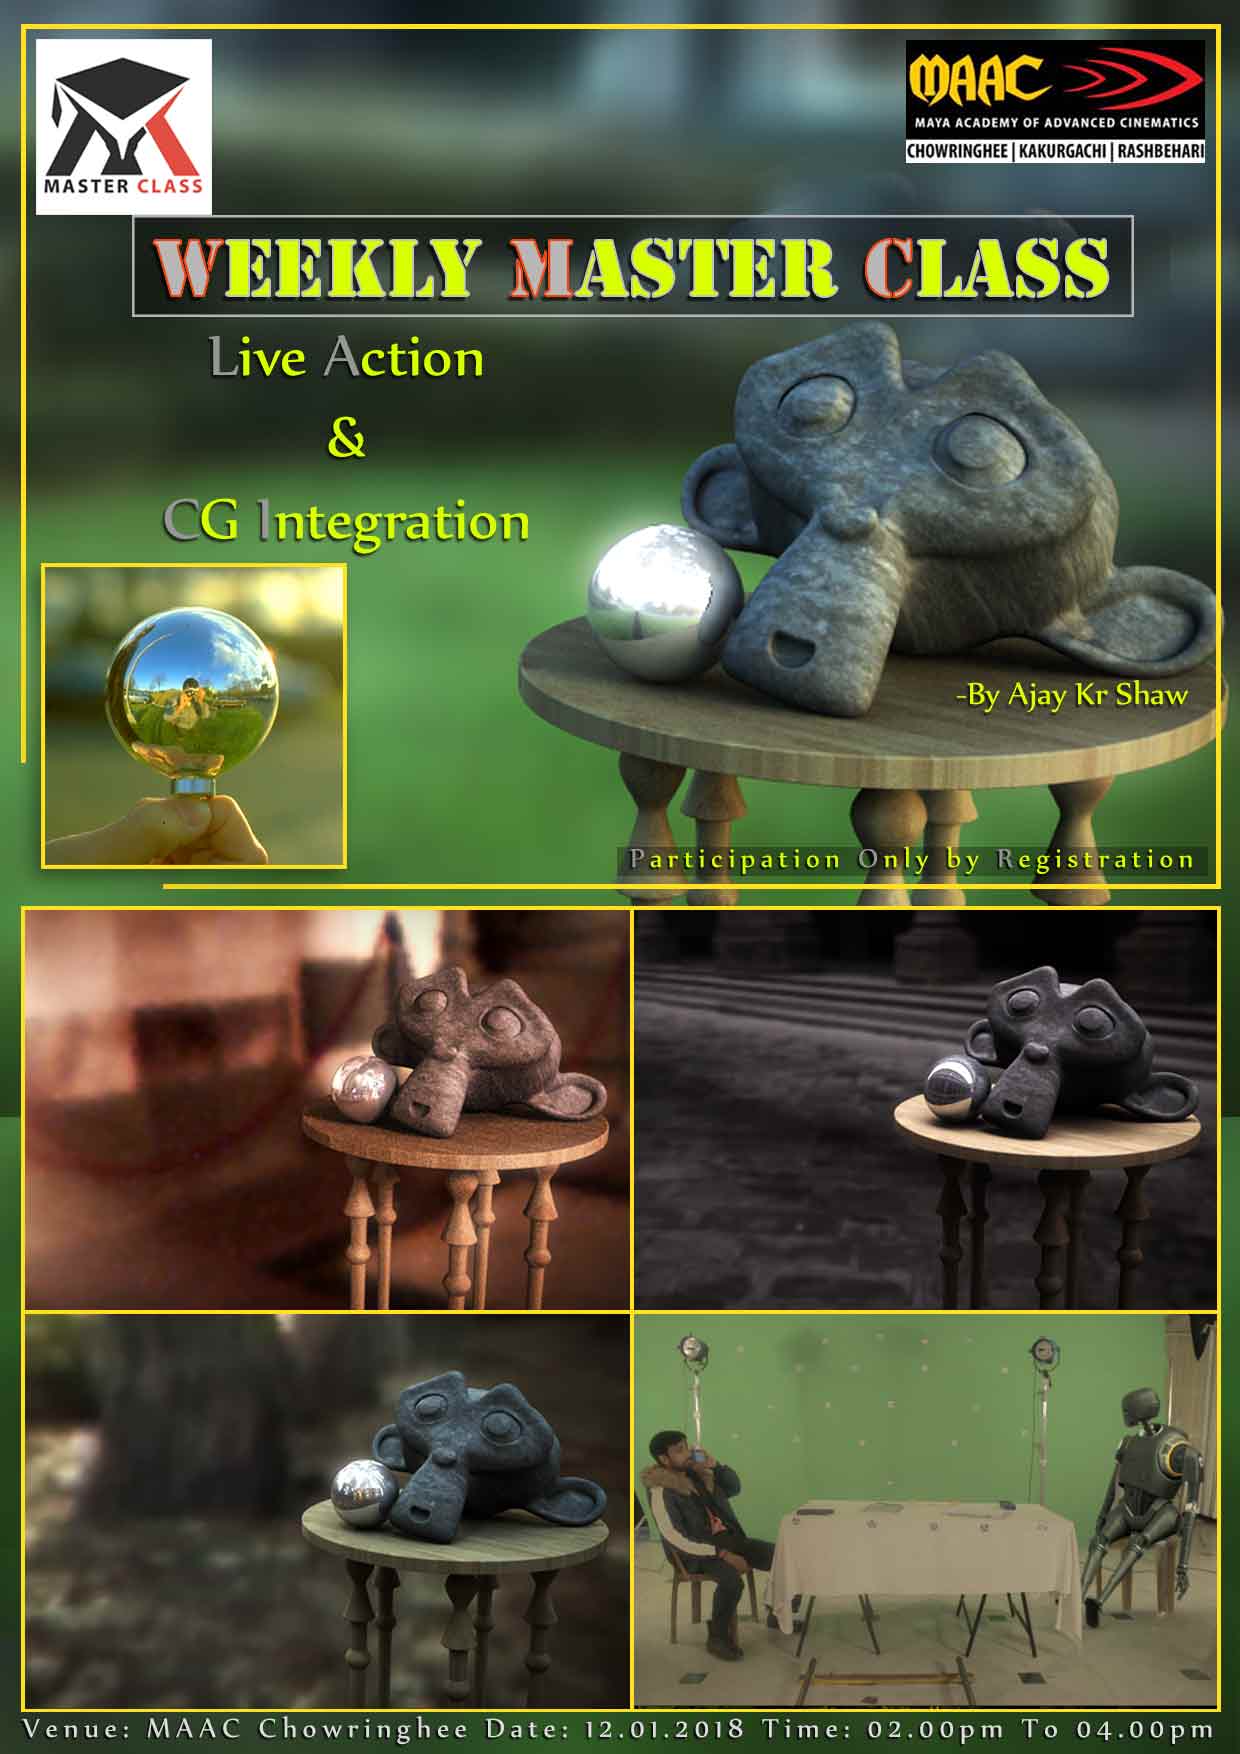 Weekly Master Class on Live Action & CG Integration